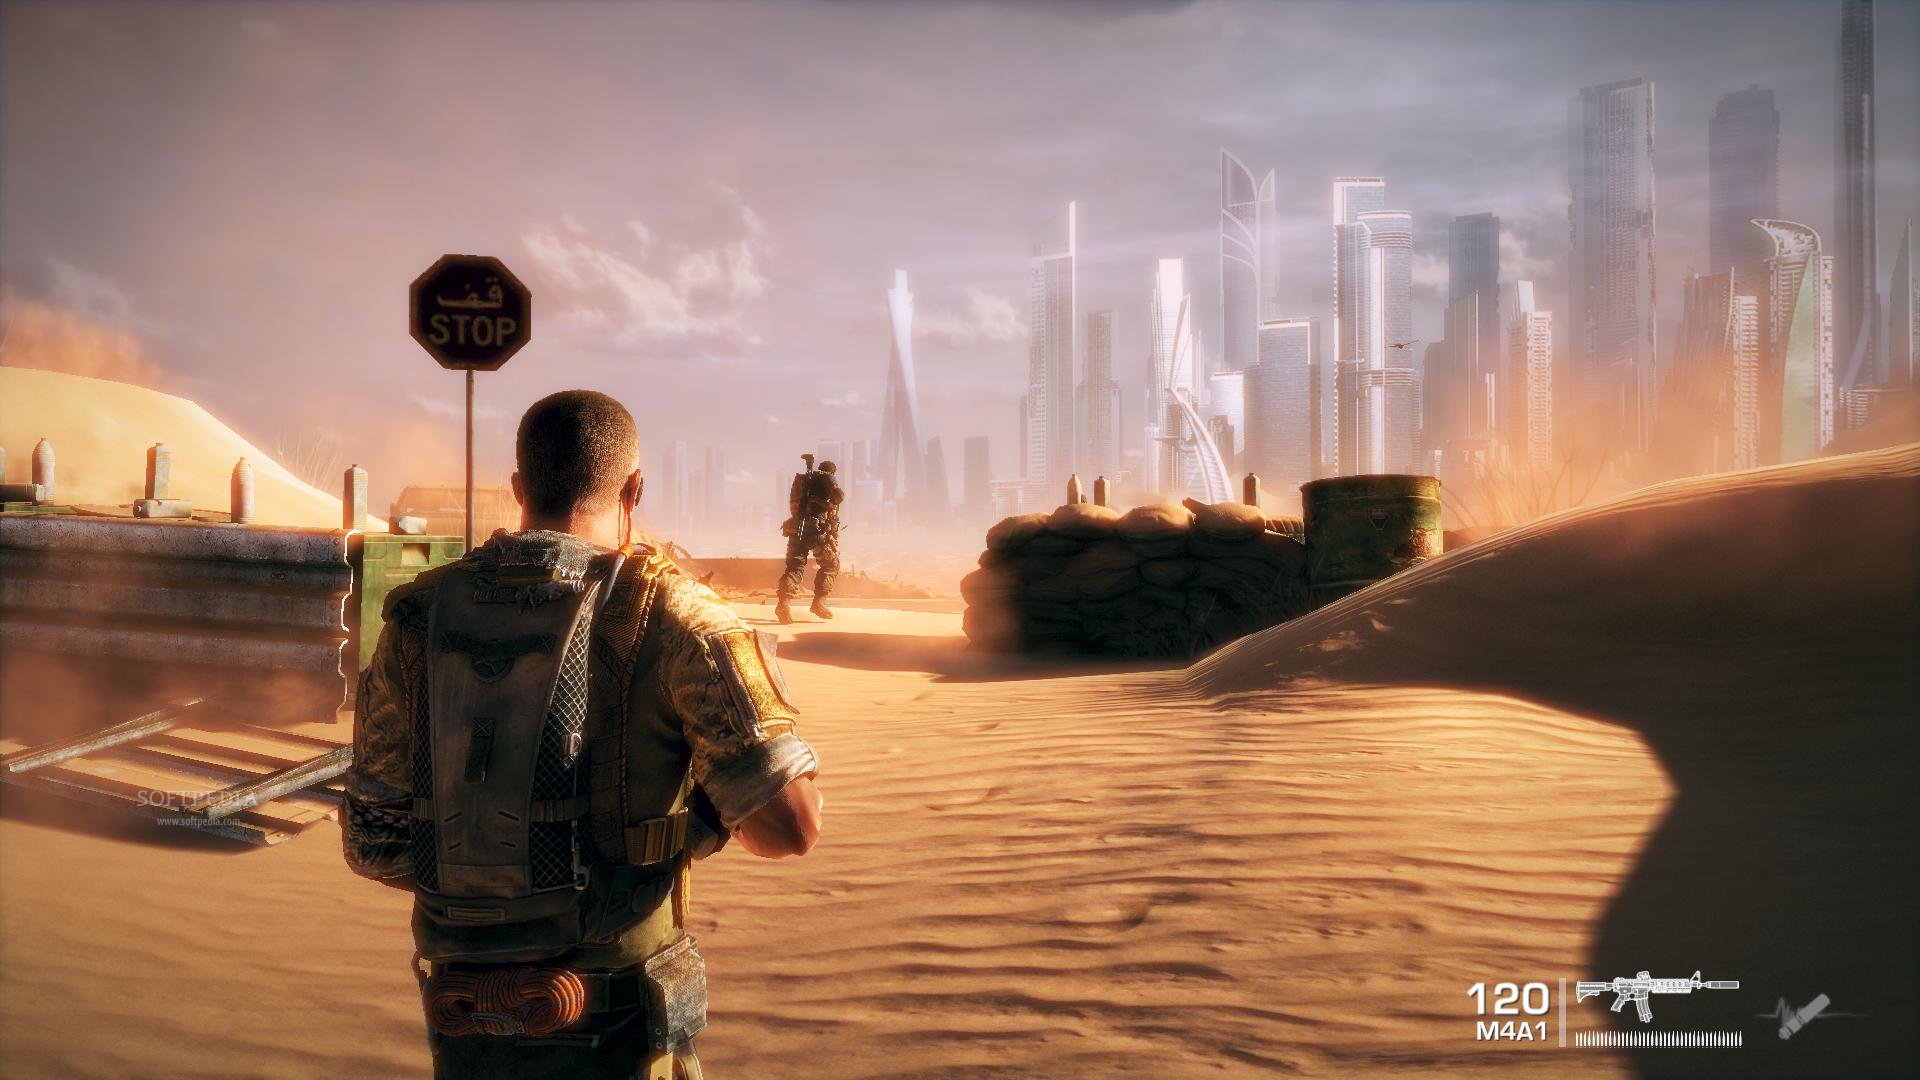 Rage after life lines 2024. Spec ops: the line. Spec ops the line геймплей. Spec ops the line Gameplay. Spec ops the line Дубай.